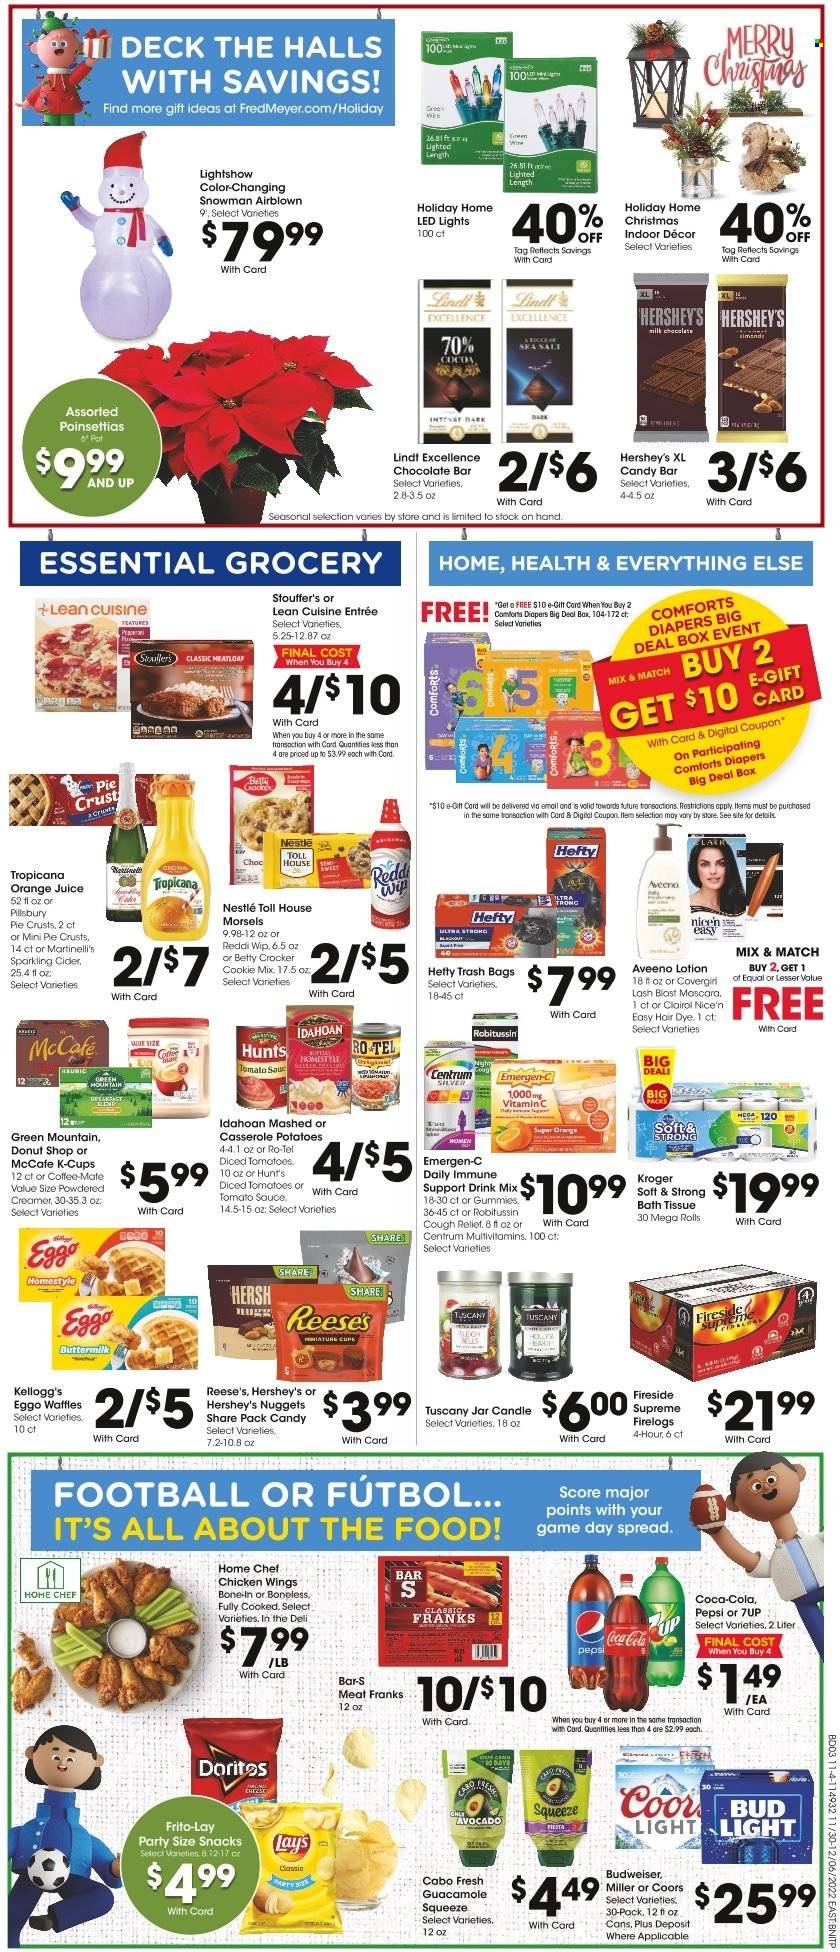 thumbnail - Fred Meyer Flyer - 11/30/2022 - 12/06/2022 - Sales products - waffles, tomatoes, nuggets, Pillsbury, meatloaf, Lean Cuisine, guacamole, buttermilk, Coffee-Mate, creamer, Reese's, Hershey's, chicken wings, Stouffer's, milk chocolate, Nestlé, Halls, snack, Lindt, Kellogg's, chocolate bar, Doritos, Lay’s, Frito-Lay, pie crust, sea salt, tomato sauce, diced tomatoes, Coca-Cola, Pepsi, orange juice, juice, 7UP, coffee capsules, McCafe, K-Cups, Green Mountain, sparkling cider, sparkling wine, cider, beer, Bud Light, Miller, nappies, Aveeno, bath tissue, Clairol, body lotion, Hefty, trash bags, mascara, pot, casserole, candle, LED light, poinsettia, multivitamin, Robitussin, vitamin c, Emergen-C, Centrum, Budweiser, Coors. Page 6.